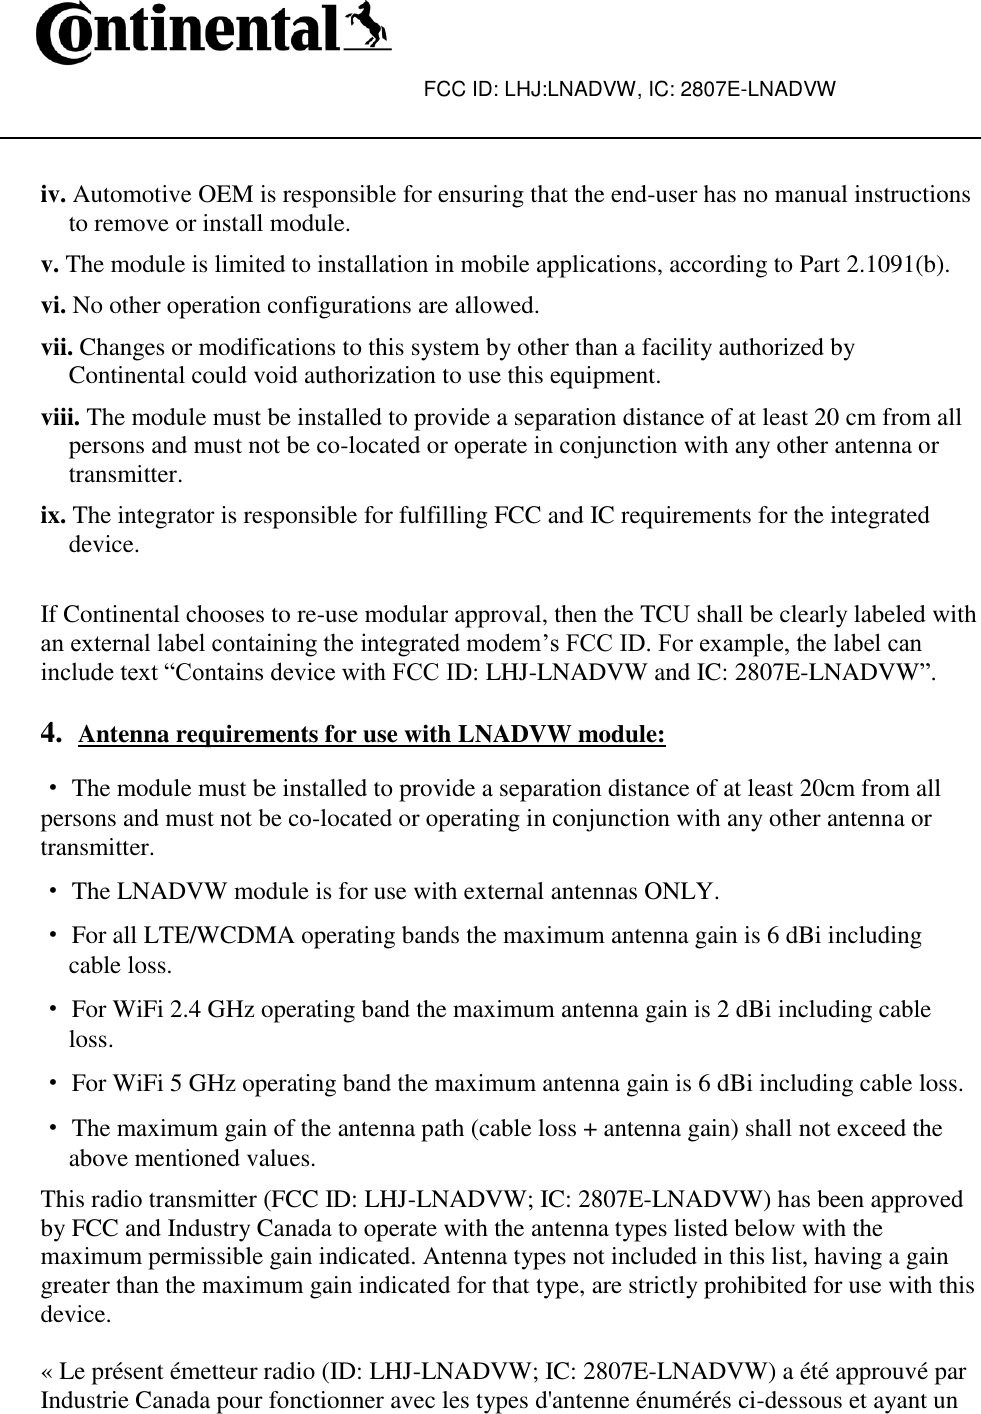 FCC ID: LHJ:LNADVW, IC: 2807E-LNADVW    iv. Automotive OEM is responsible for ensuring that the end-user has no manual instructions to remove or install module. v. The module is limited to installation in mobile applications, according to Part 2.1091(b). vi. No other operation configurations are allowed. vii. Changes or modifications to this system by other than a facility authorized by Continental could void authorization to use this equipment. viii. The module must be installed to provide a separation distance of at least 20 cm from all persons and must not be co-located or operate in conjunction with any other antenna or transmitter. ix. The integrator is responsible for fulfilling FCC and IC requirements for the integrated device.  If Continental chooses to re-use modular approval, then the TCU shall be clearly labeled with an external label containing the integrated modem’s FCC ID. For example, the label can include text “Contains device with FCC ID: LHJ-LNADVW and IC: 2807E-LNADVW”.  4. Antenna requirements for use with LNADVW module:  ·The module must be installed to provide a separation distance of at least 20cm from all persons and must not be co-located or operating in conjunction with any other antenna or transmitter. · The LNADVW module is for use with external antennas ONLY. · For all LTE/WCDMA operating bands the maximum antenna gain is 6 dBi including cable loss. · For WiFi 2.4 GHz operating band the maximum antenna gain is 2 dBi including cable loss. · For WiFi 5 GHz operating band the maximum antenna gain is 6 dBi including cable loss. · The maximum gain of the antenna path (cable loss + antenna gain) shall not exceed the above mentioned values. This radio transmitter (FCC ID: LHJ-LNADVW; IC: 2807E-LNADVW) has been approved by FCC and Industry Canada to operate with the antenna types listed below with the maximum permissible gain indicated. Antenna types not included in this list, having a gain greater than the maximum gain indicated for that type, are strictly prohibited for use with this device.  « Le présent émetteur radio (ID: LHJ-LNADVW; IC: 2807E-LNADVW) a été approuvé par Industrie Canada pour fonctionner avec les types d&apos;antenne énumérés ci-dessous et ayant un 